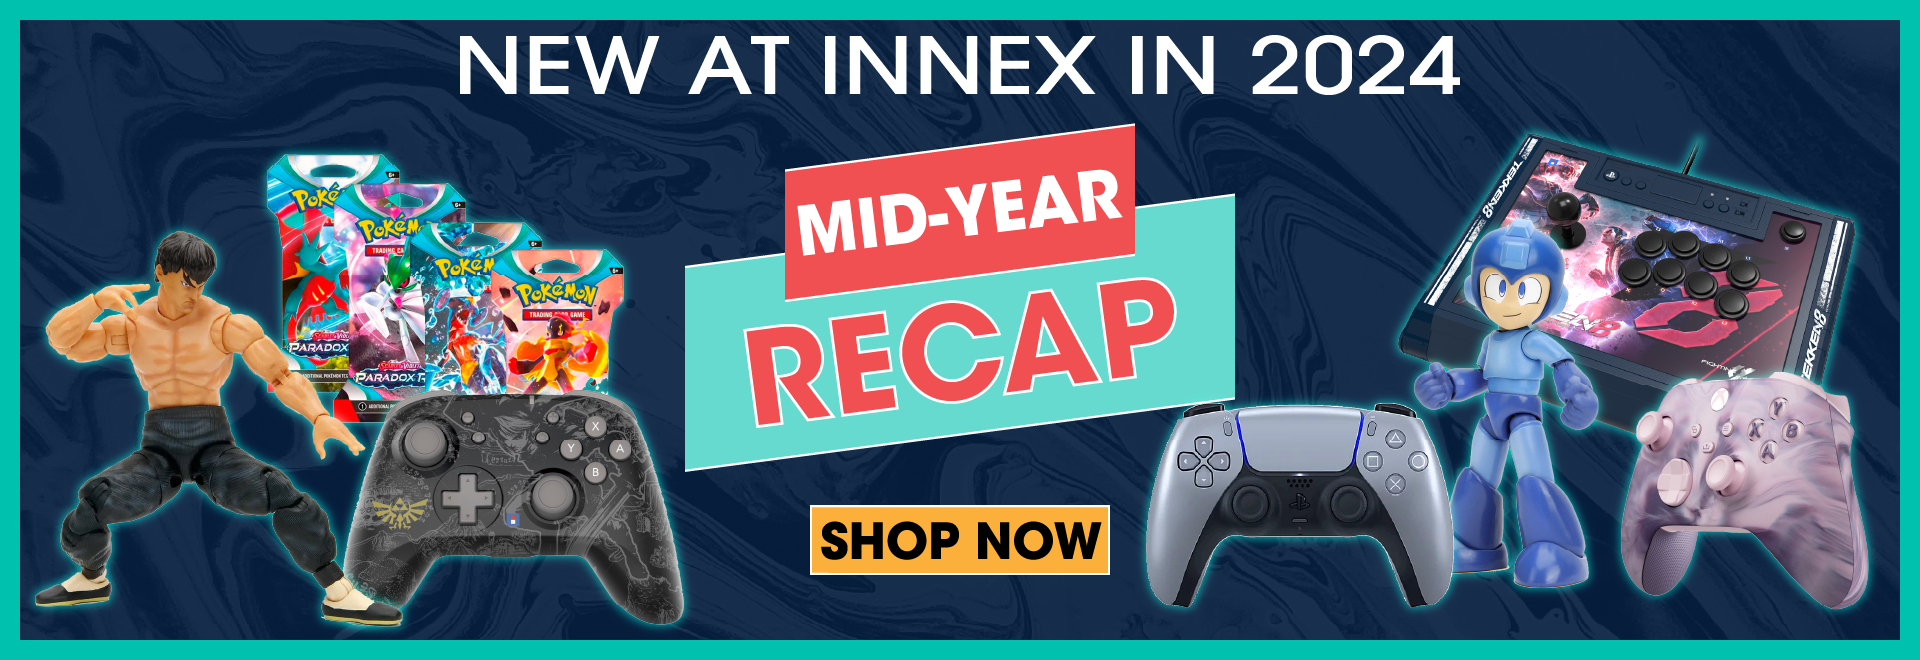 Shop new products at Innex! - Mid-year Recap 2024